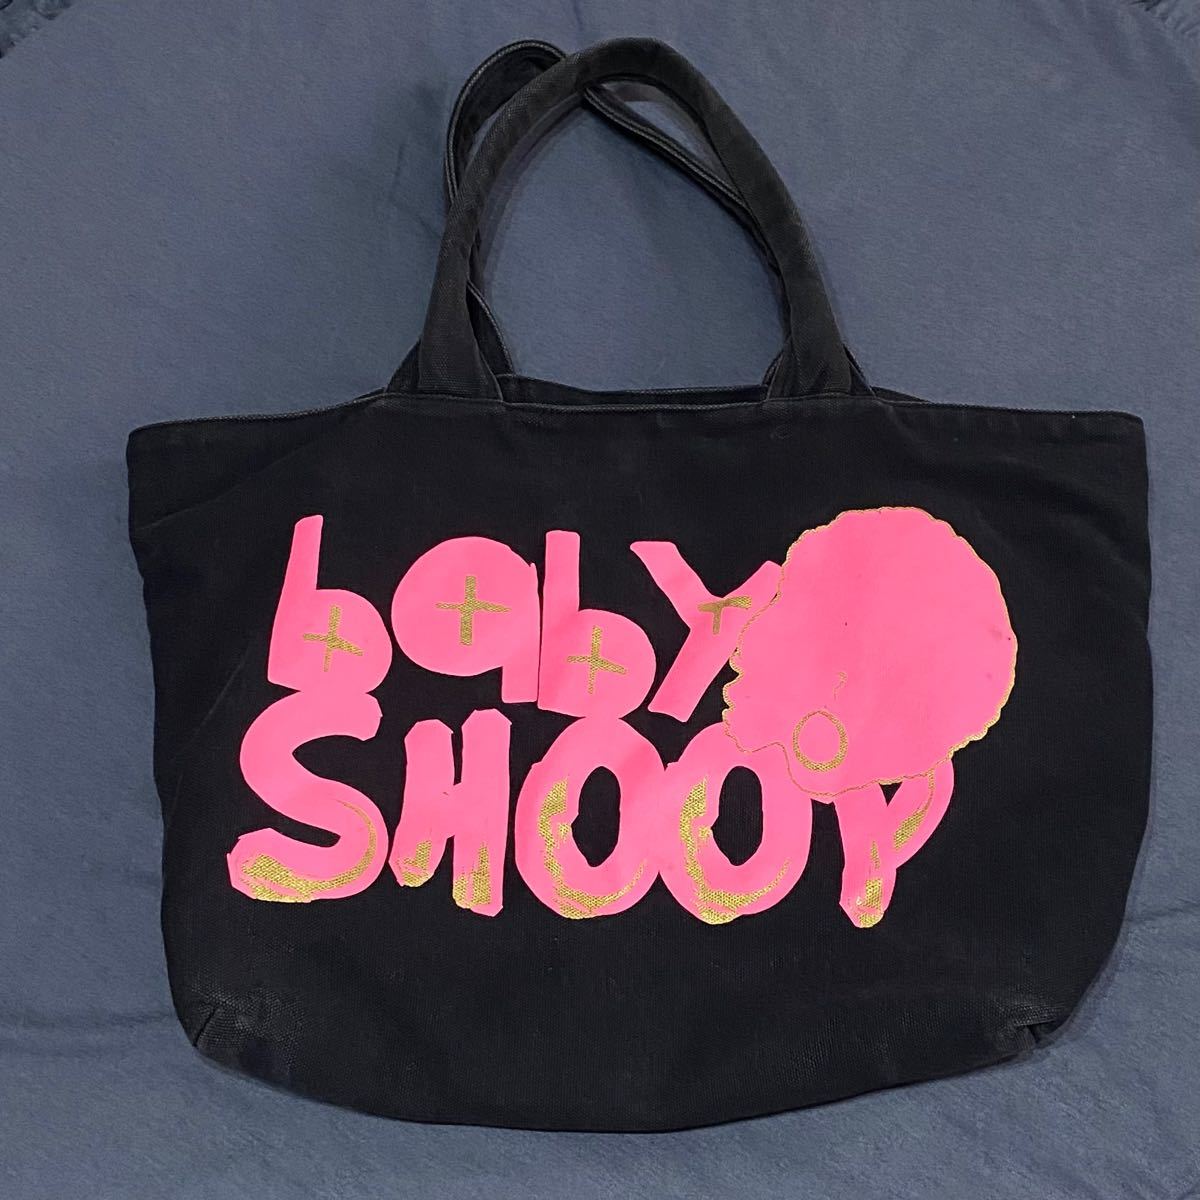 BABY SHOOP d.i.a. ANAP ギャル 鞄 バッグ エコバッグ トートバッグ A4 サイズ収納可能